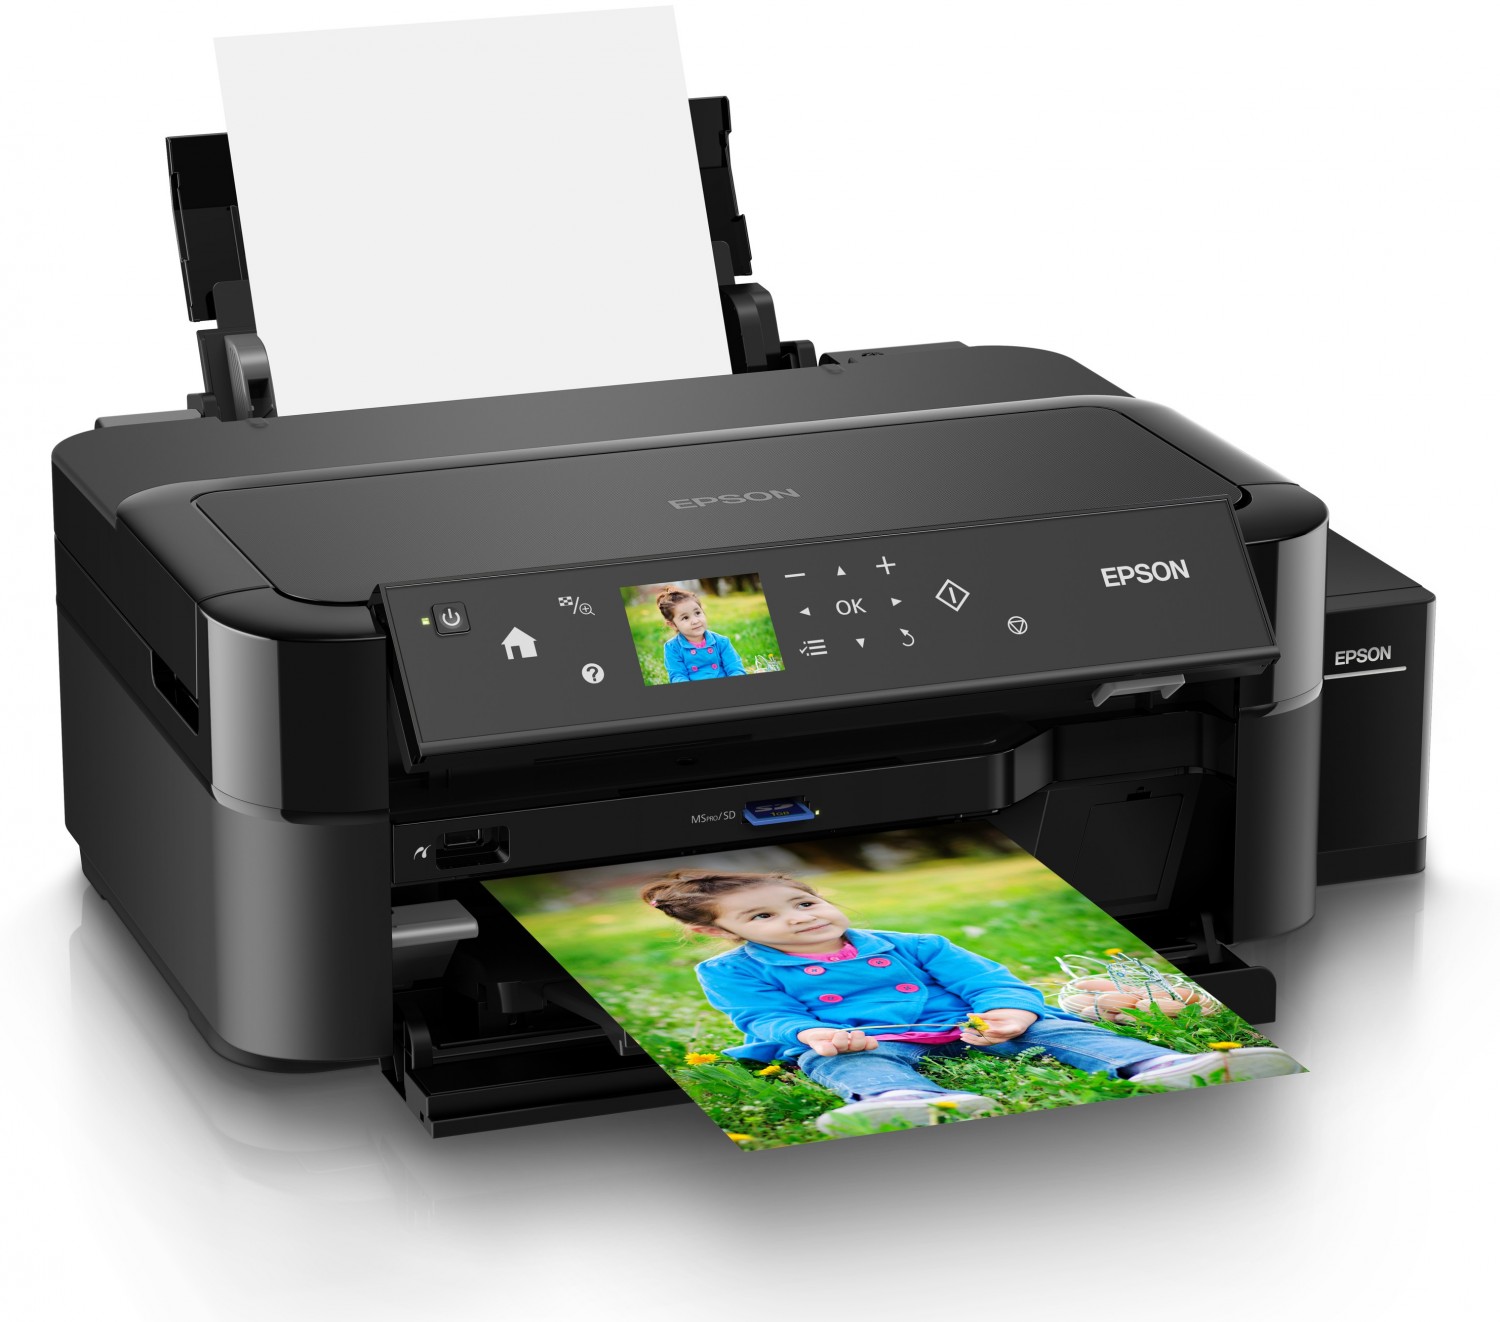 Step-by-step Driver Epson Printer L810 MX Linux Installation - Featured